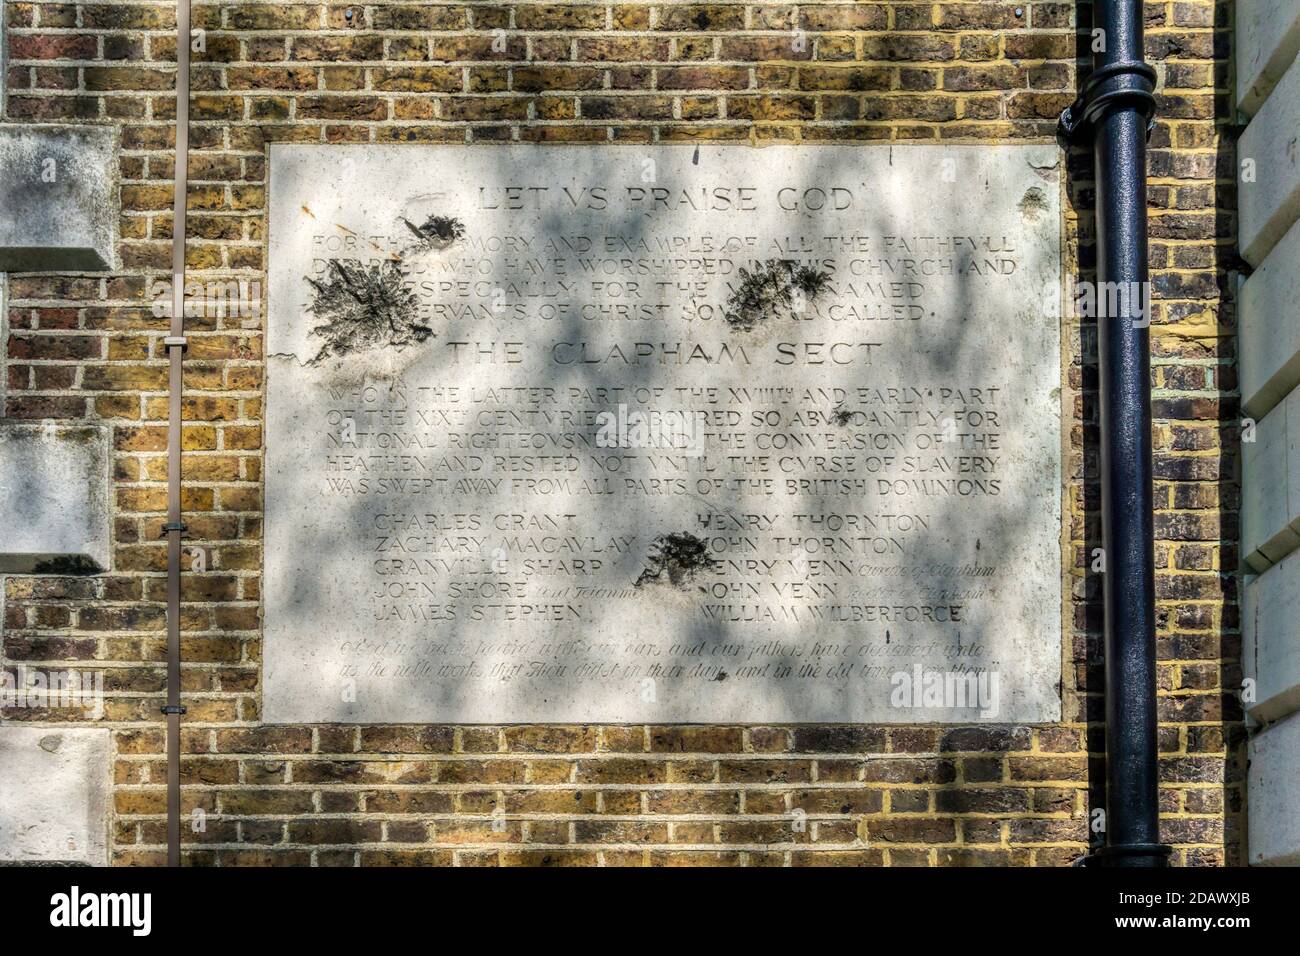 Shrapnel damage from WWII to a plaque commemorating The Clapham Sect anti-slavery campaigners.  On Holy Trinity church, Clapham Common. Stock Photo